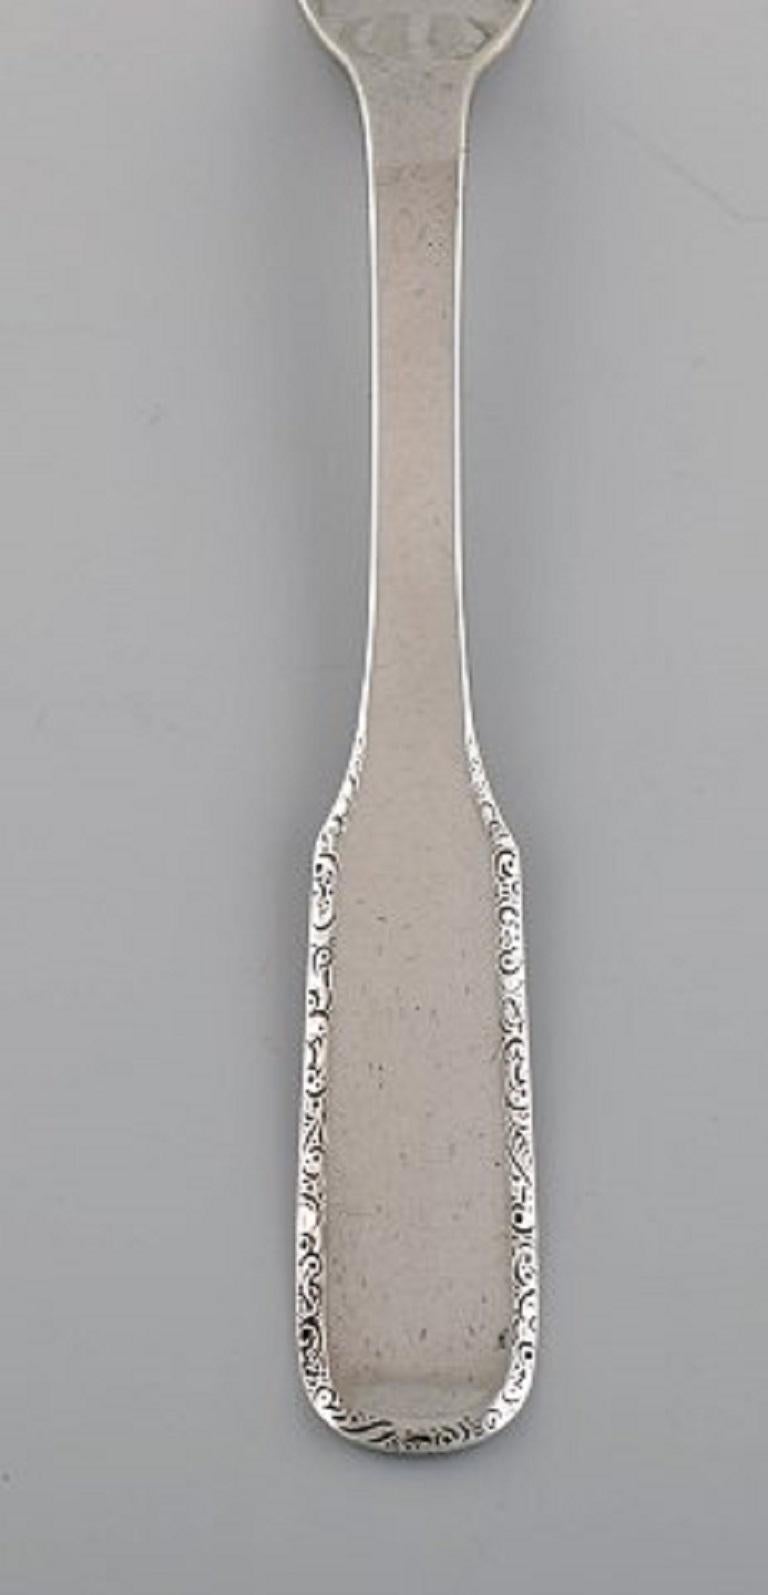 Evald Nielsen Number 25 dinner fork and a tablespoon in silver. 1920s.
Spoon length: 21.3 cm.
Stamped.
In excellent condition.
Our skilled Georg Jensen silver / jeweler can polish all silver and gold so that it appears as new. The price is very